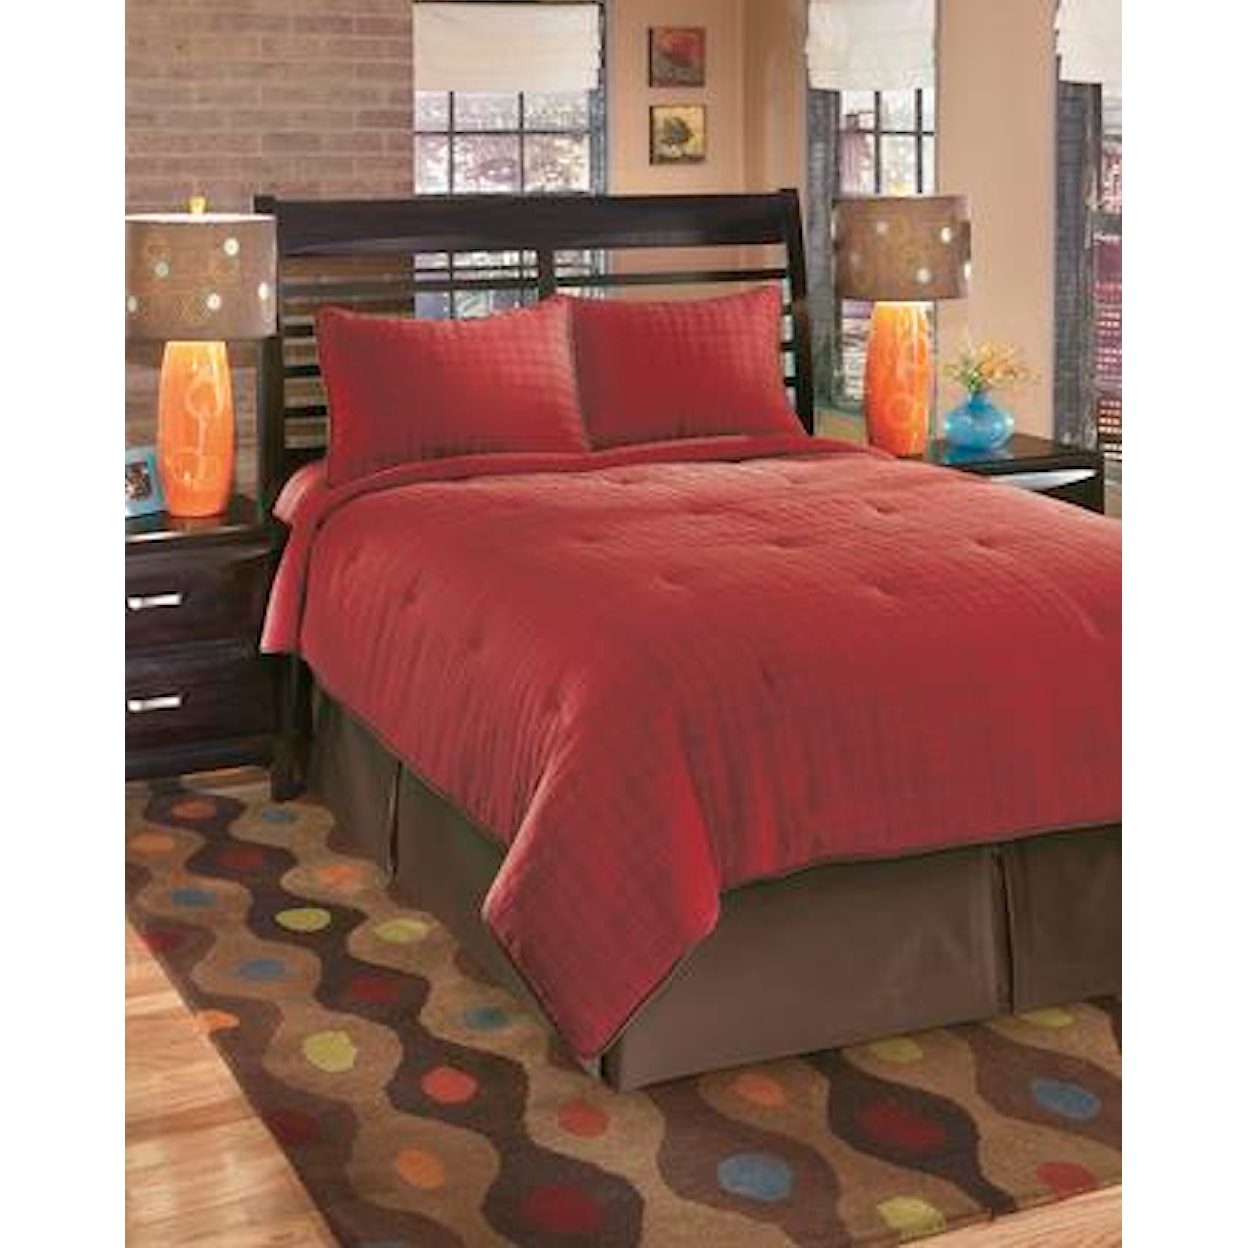 Signature Design by Ashley Bedding Sets Queen Interlude Brick Top of Bed Set